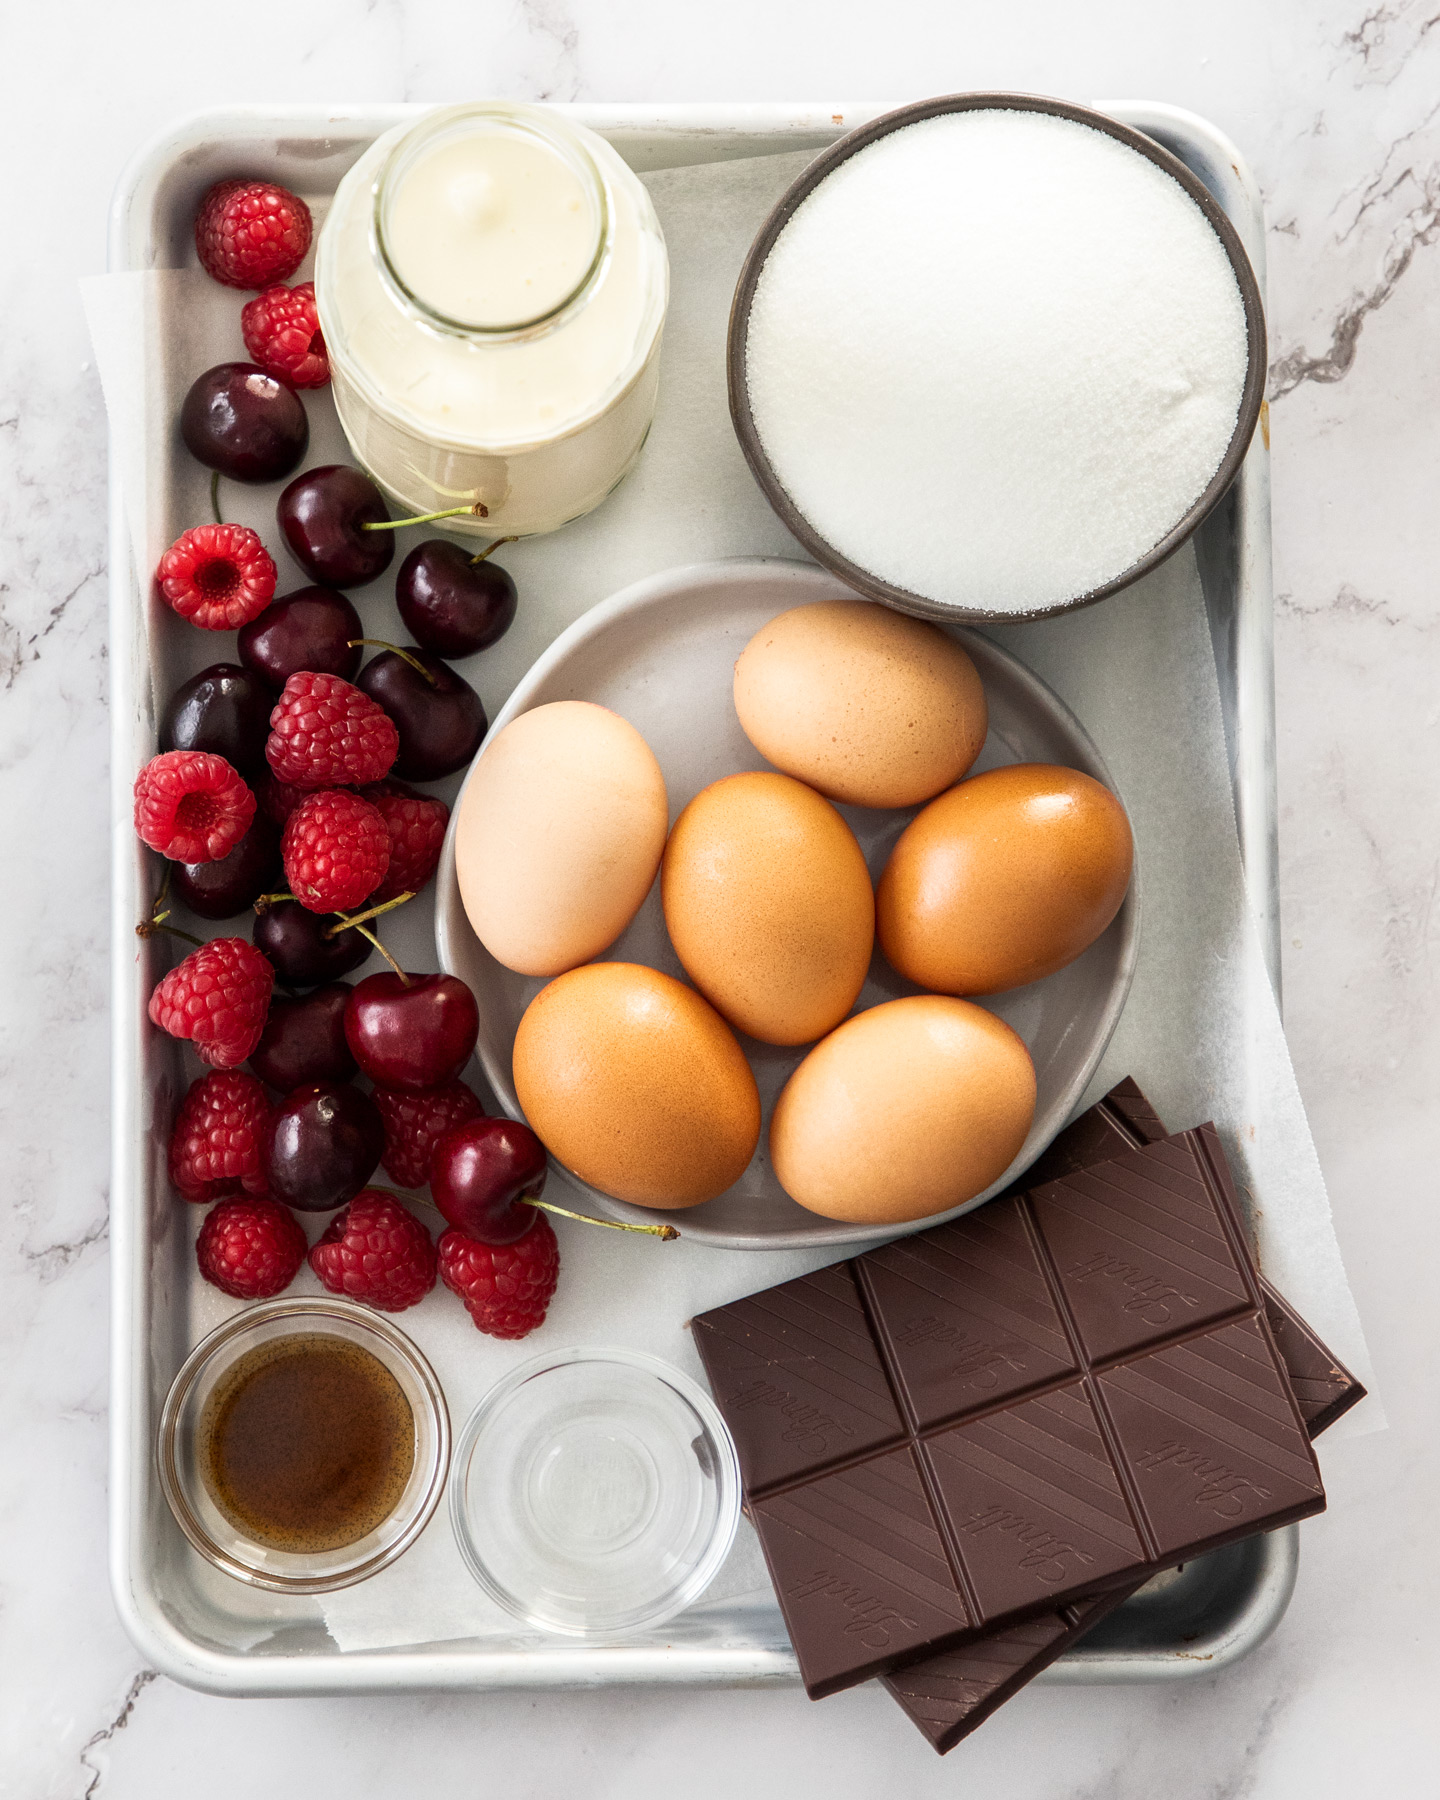 Ingredients for chocolate meringue cake on a baking tray.